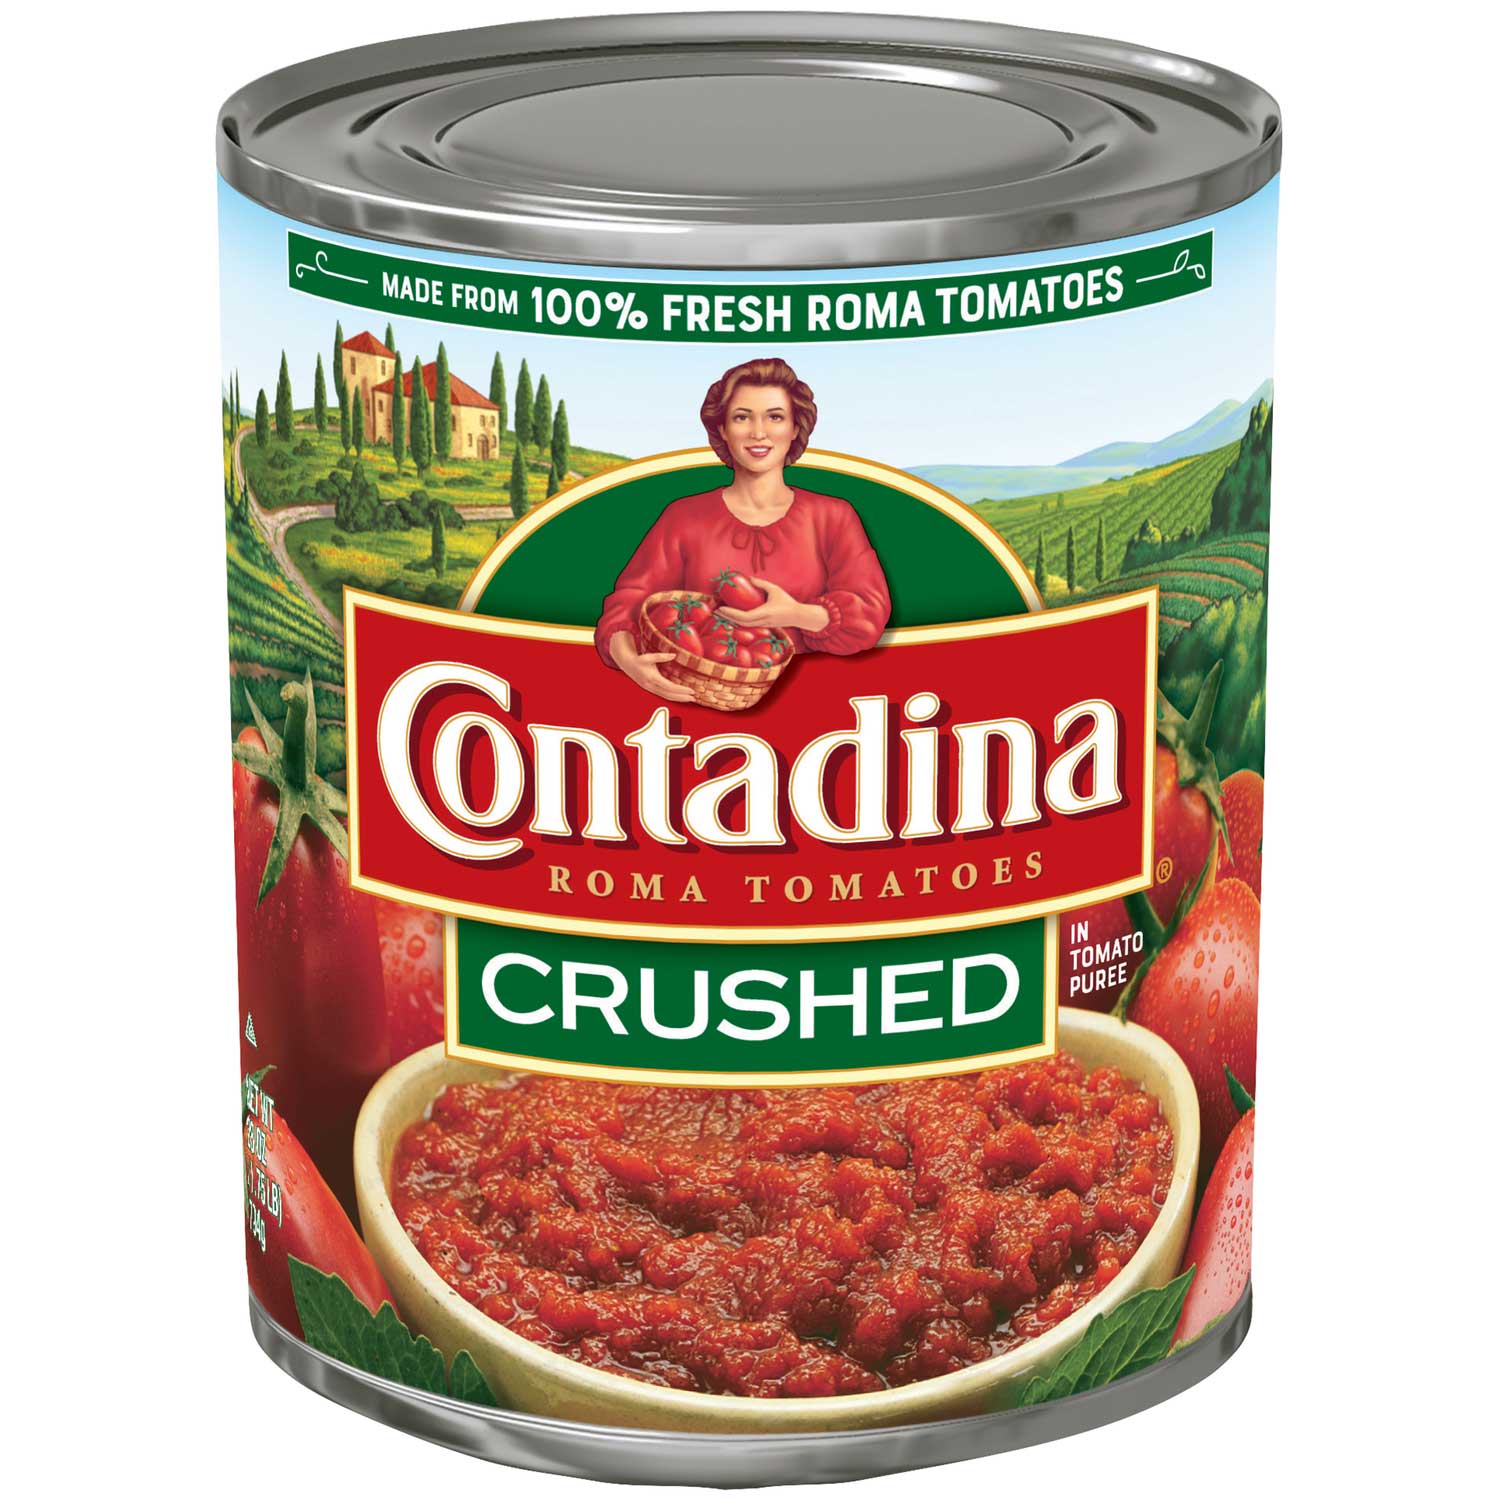 Contadina Crushed Tomatoes, 28 Ounce -- 6 per case.